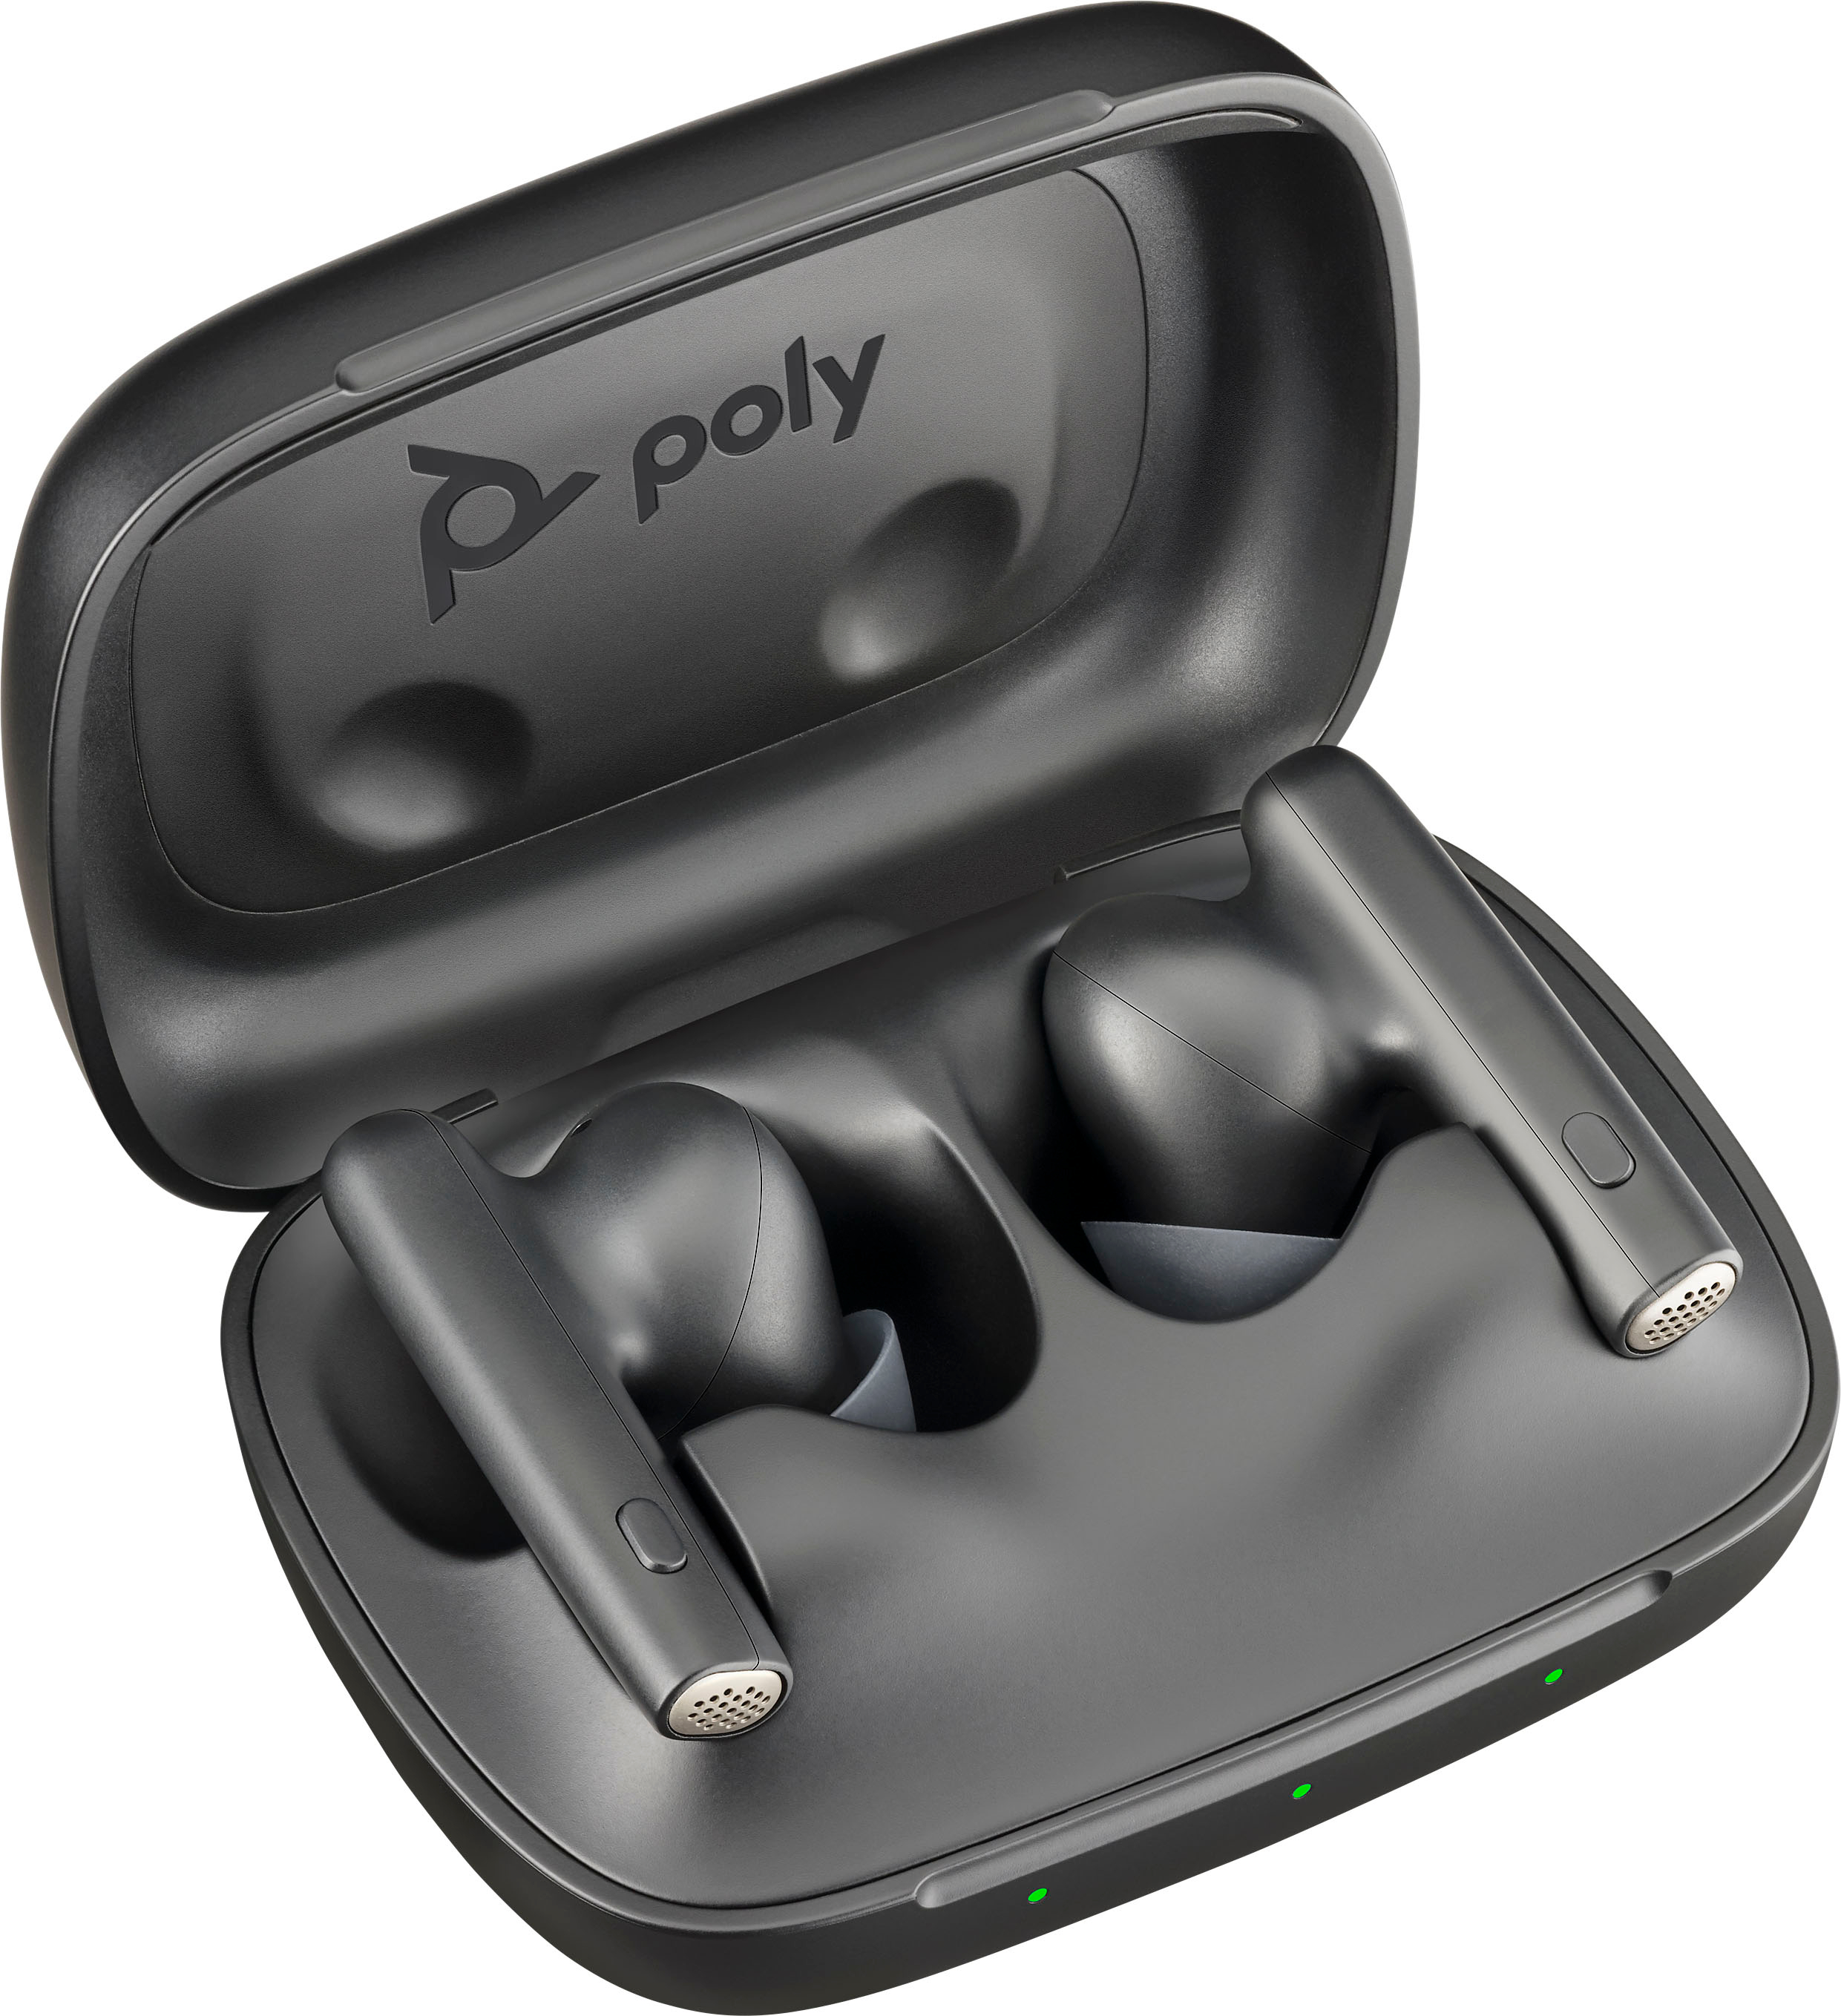 Wireless 60 Best formerly Earbuds Canceling Noise Free Active Poly with Buy True Voyager Voyager - Black Plantronics 60 Free